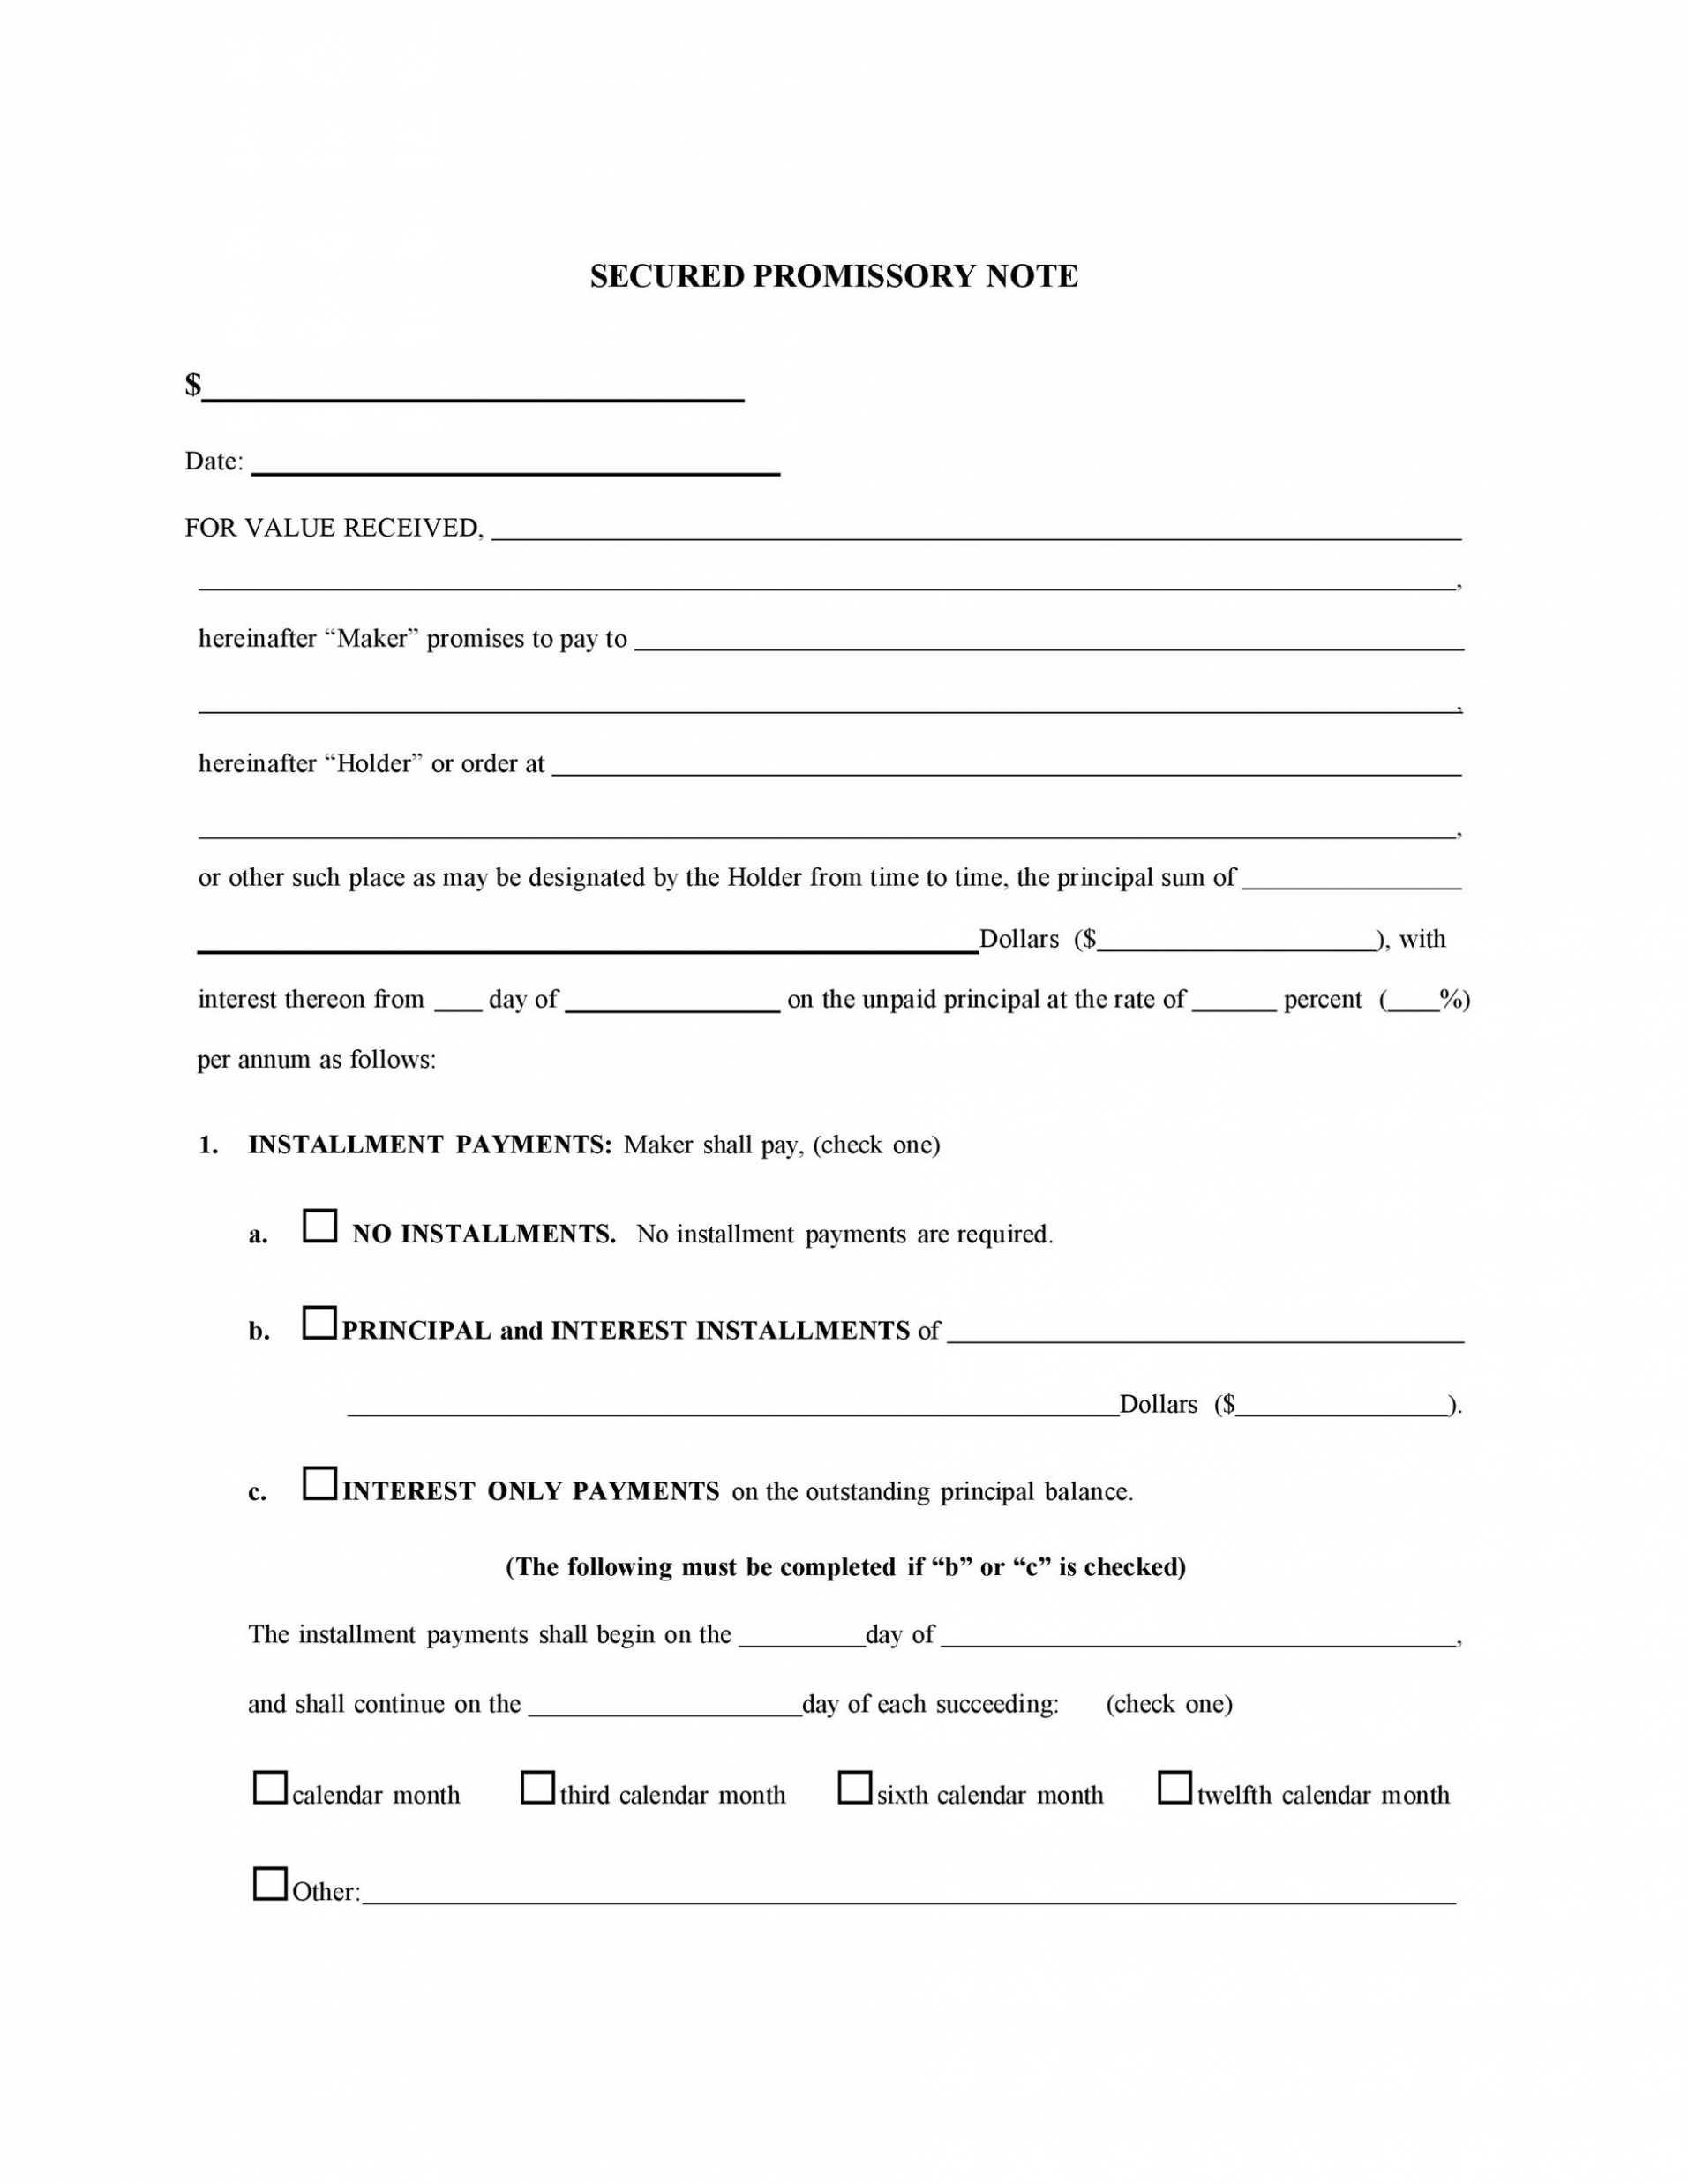 45 Free Promissory Note Templates &amp; Forms [Word &amp; Pdf] ᐅ regarding Promissary Note Template